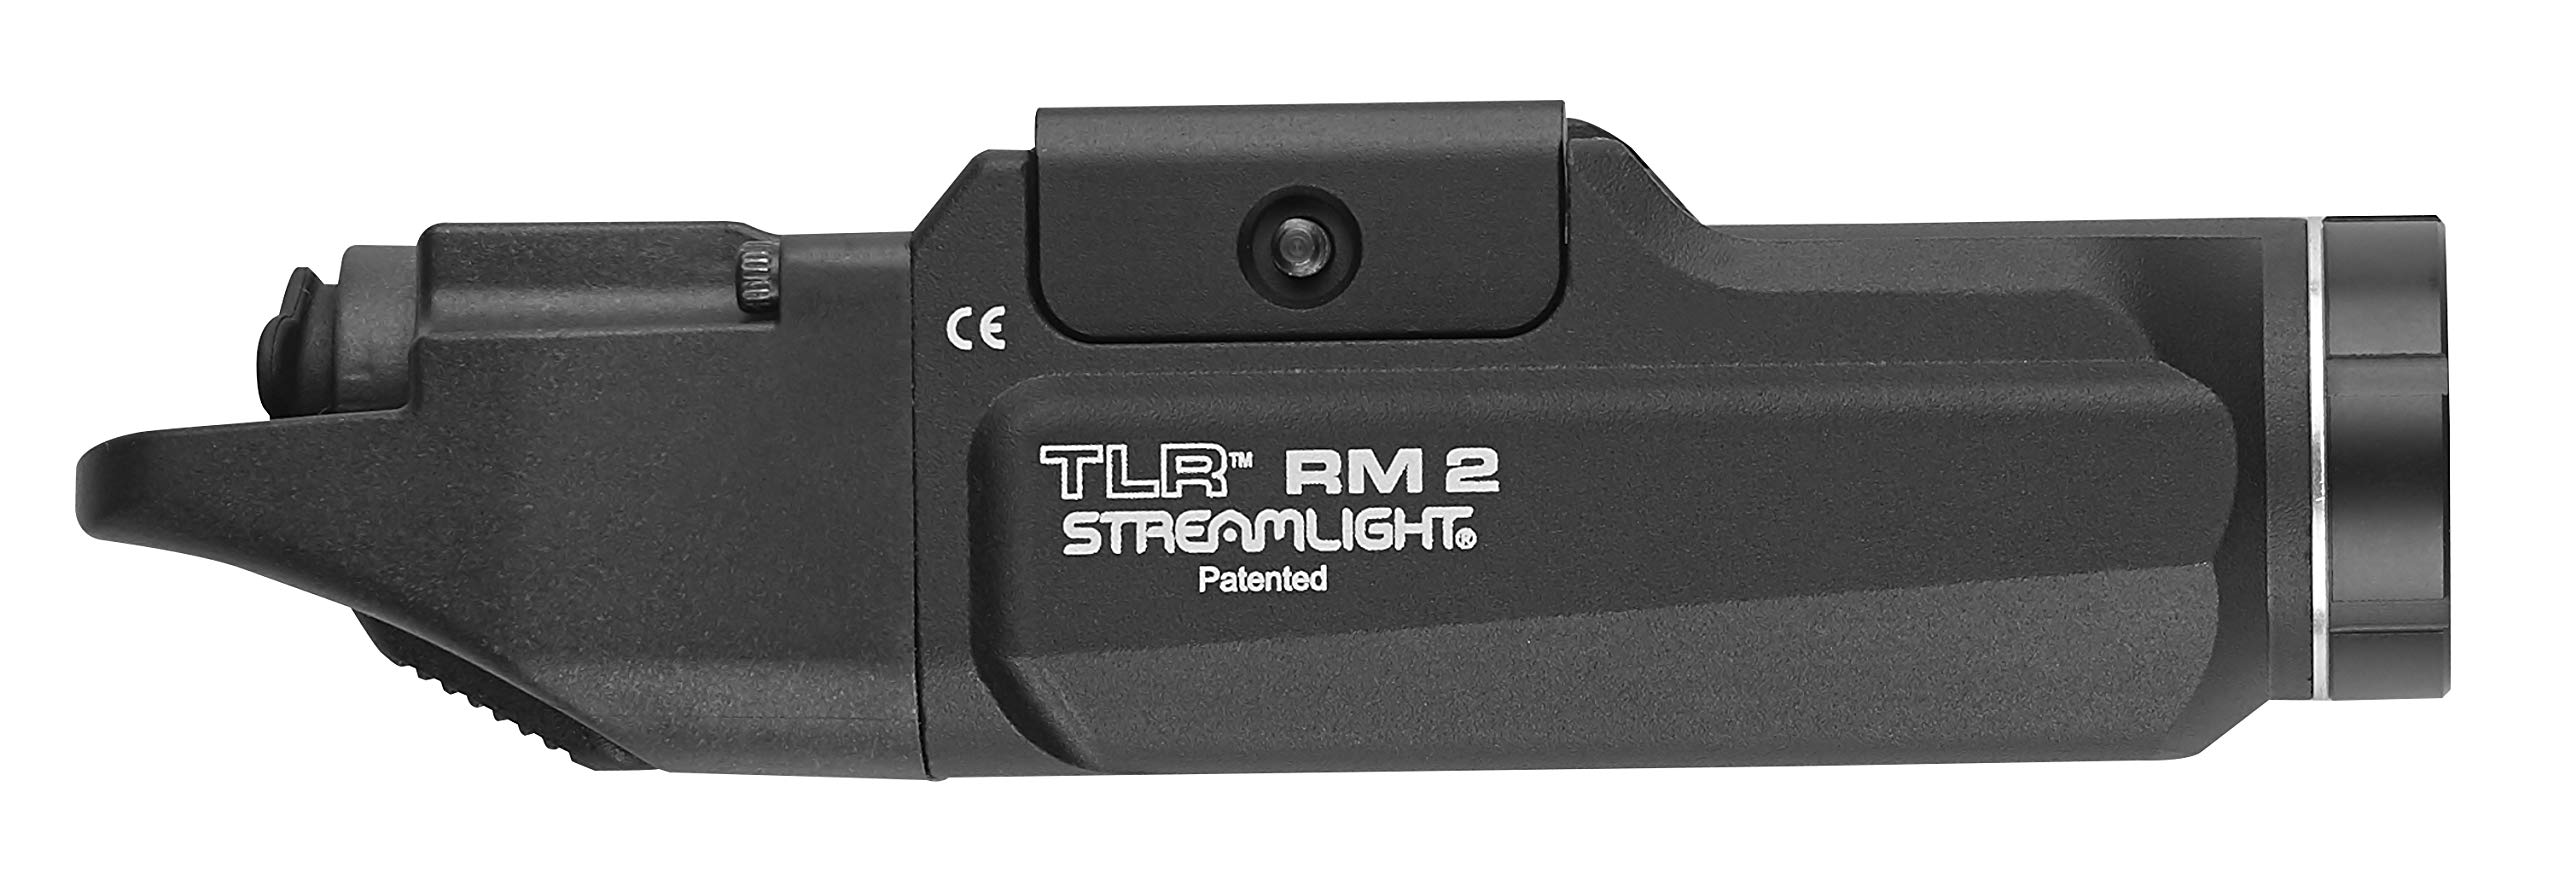 Streamlight 69451 TLR RM 2 Compact Rail-Mounted Tactical Lighting System with Rail Locating Keys and Two Lithium Batteries, Black